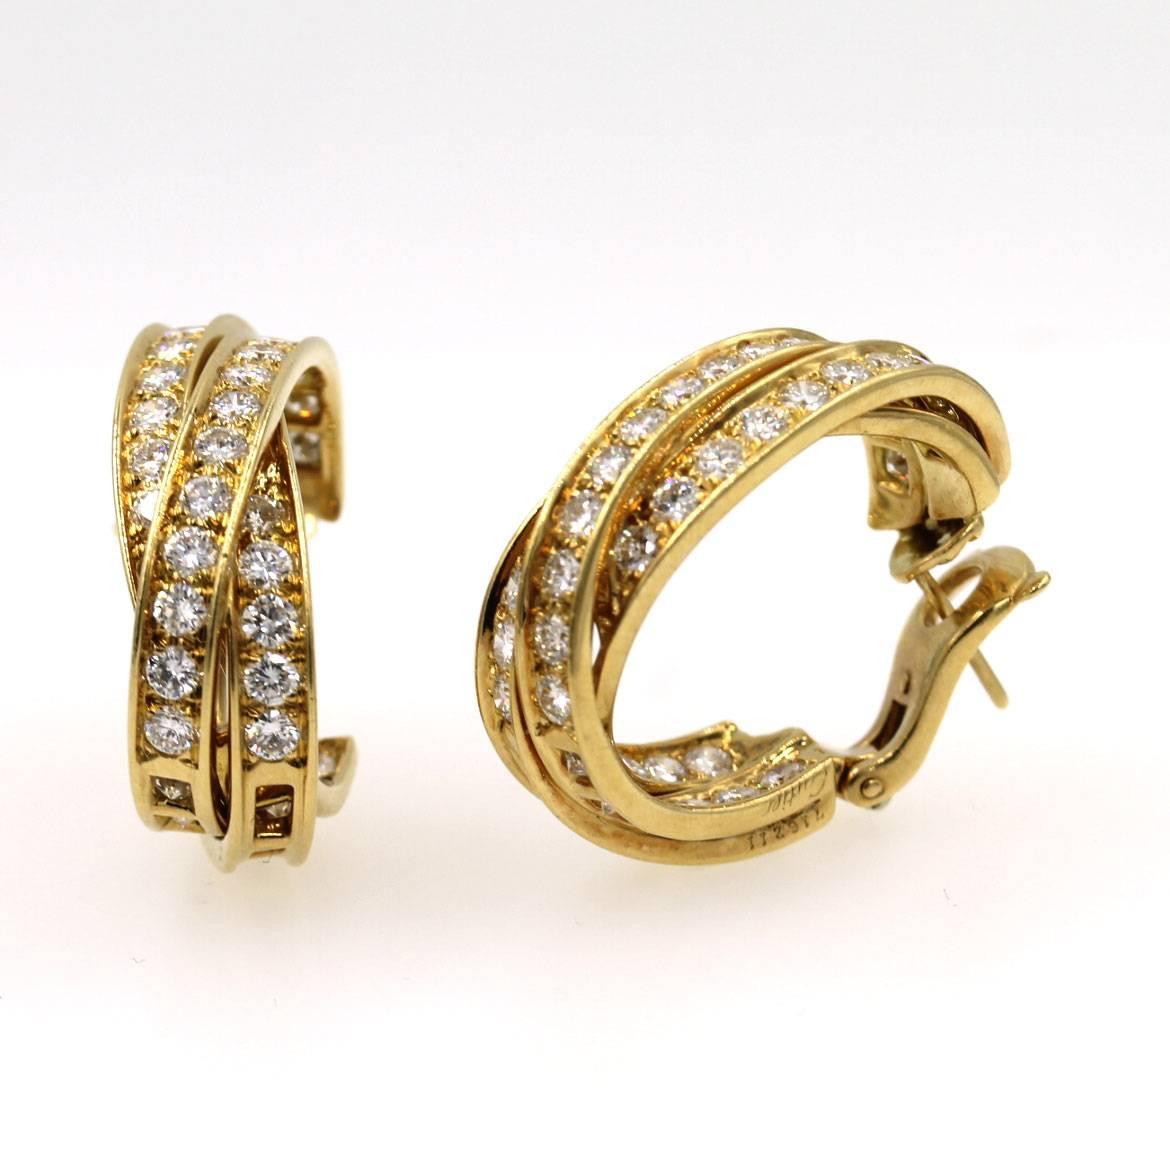 These timeless diamond in/out hoop earrings by Cartier are circa 1990's ( this size is retired from the collection). The earrings feature 82 round brilliant cut diamonds that equal approximately 5.0 CTTW graded E/F color and VVS clarity. 